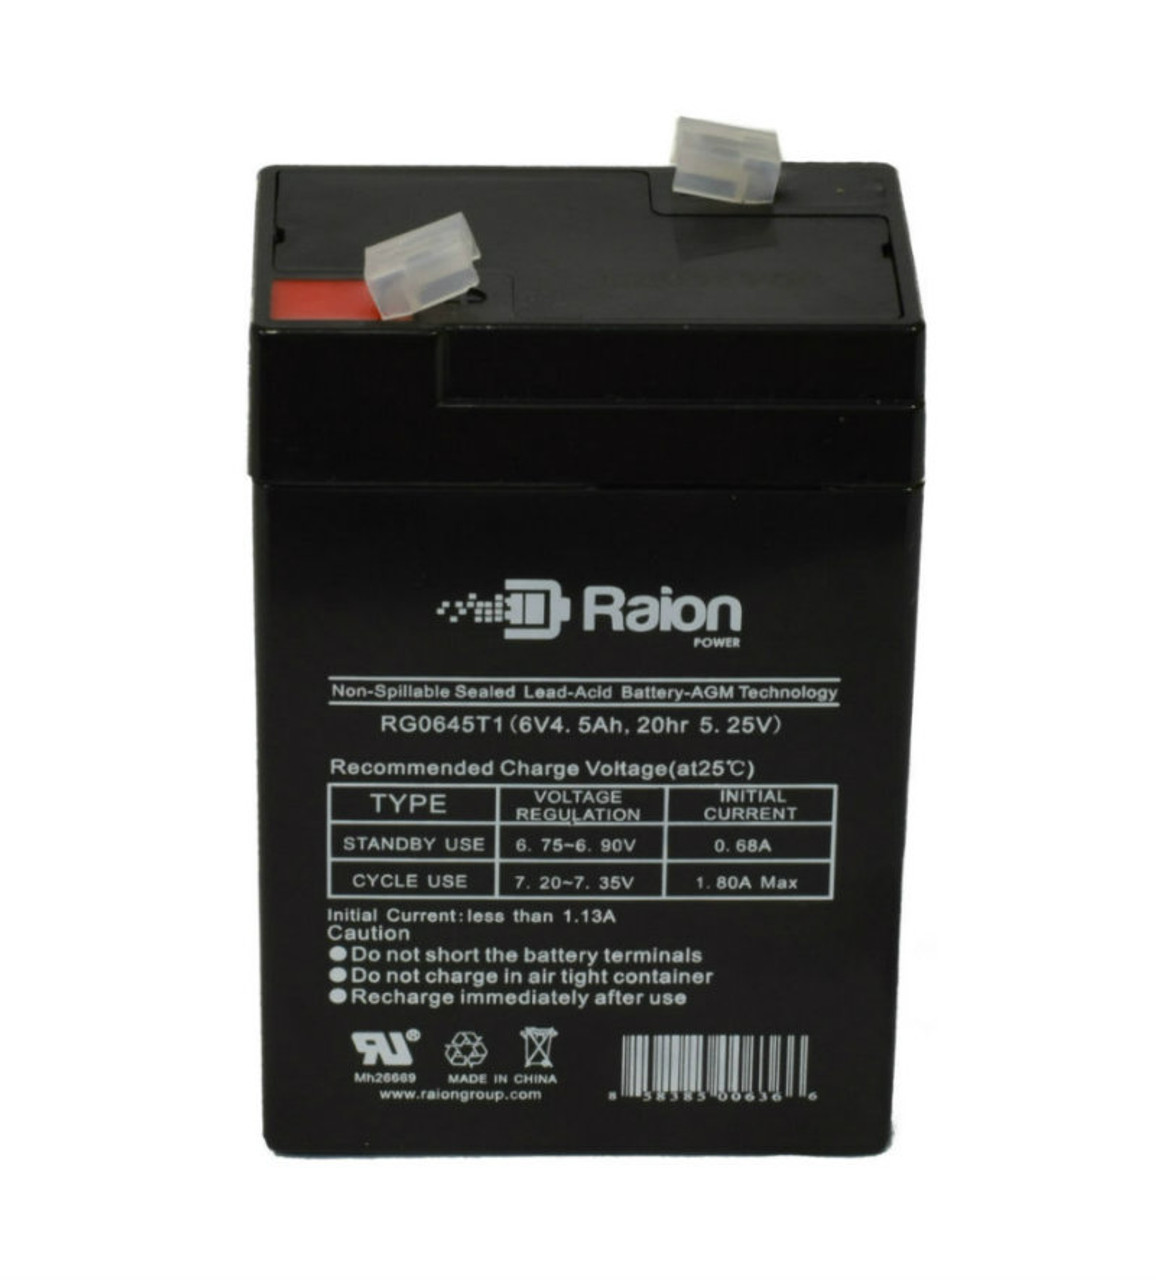 Raion Power RG0645T1 Replacement Battery Cartridge for Duramp NP6-6